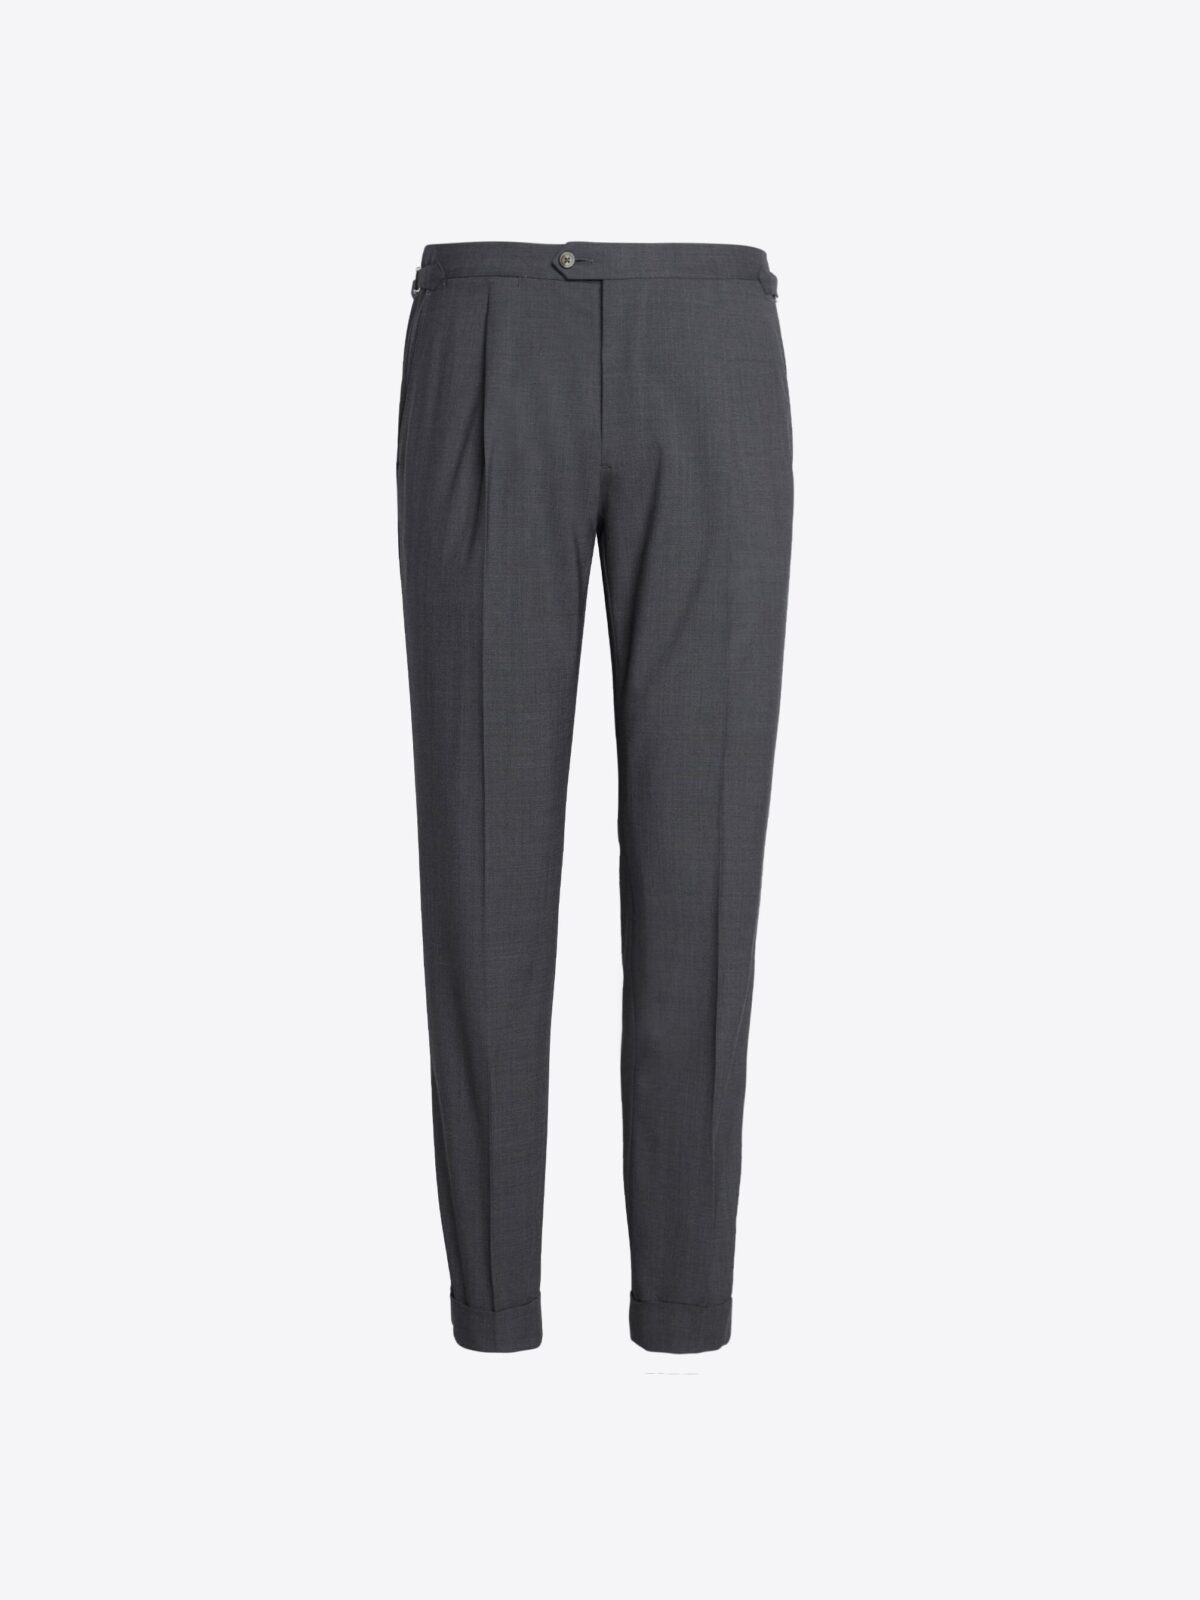 This thick cashmere pants is what I want! The upper body is slim and warm  Get it here!!!